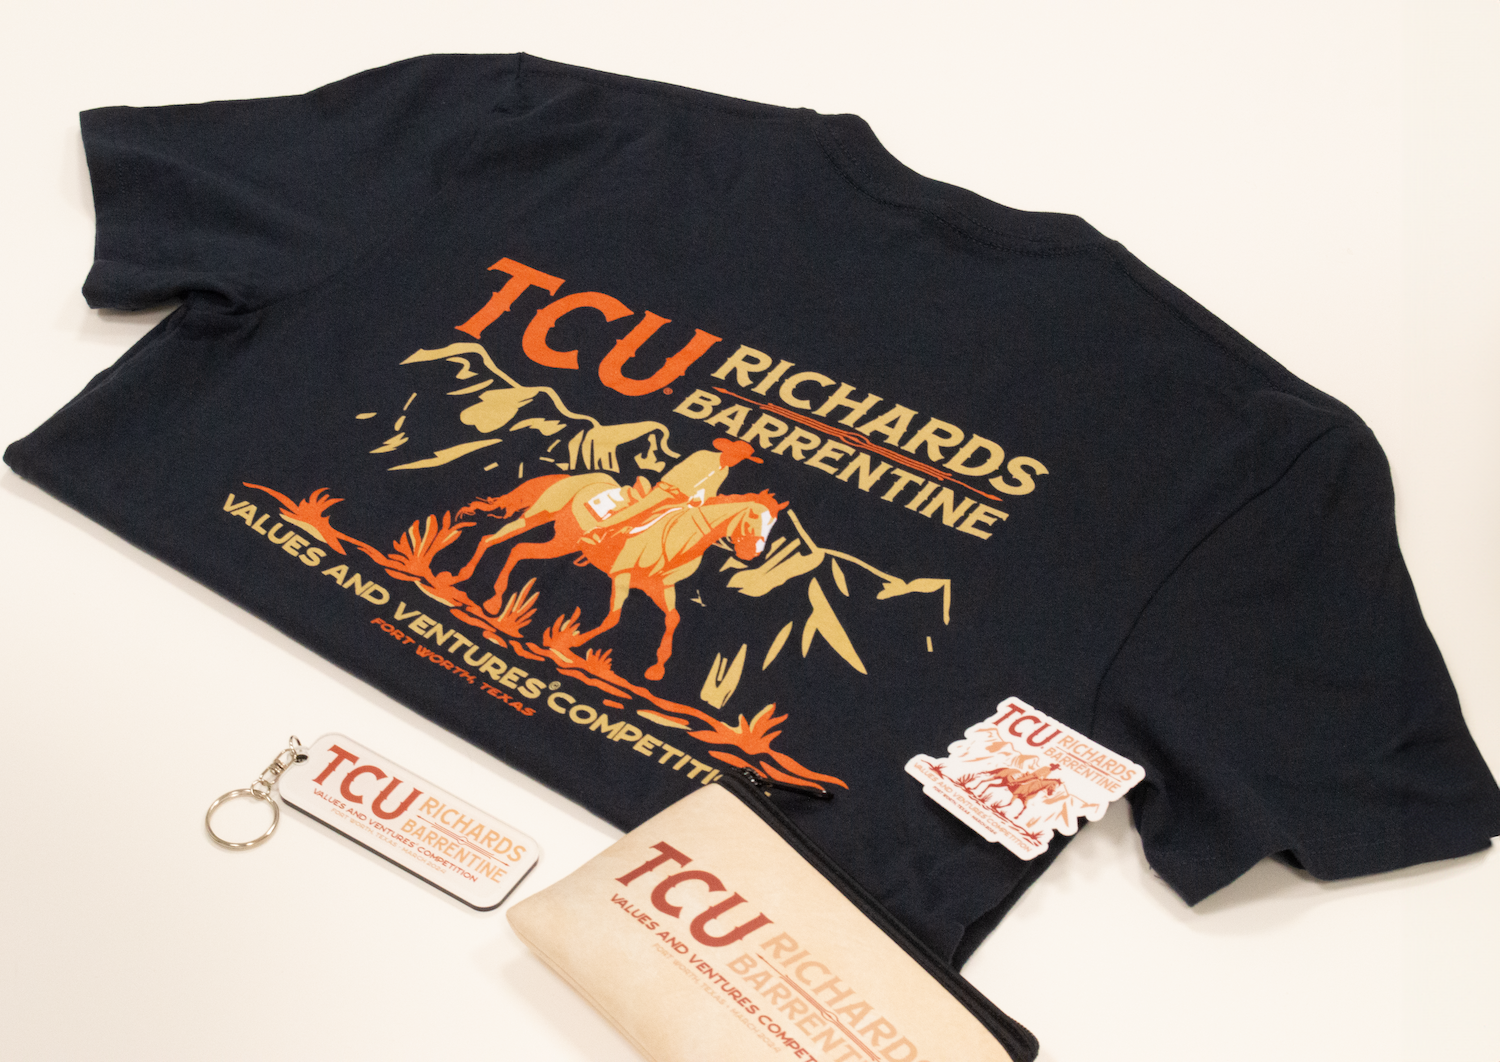 Image of brand collateral for develop branding for the TCU Richard Barrentine Values and Ventures competition.